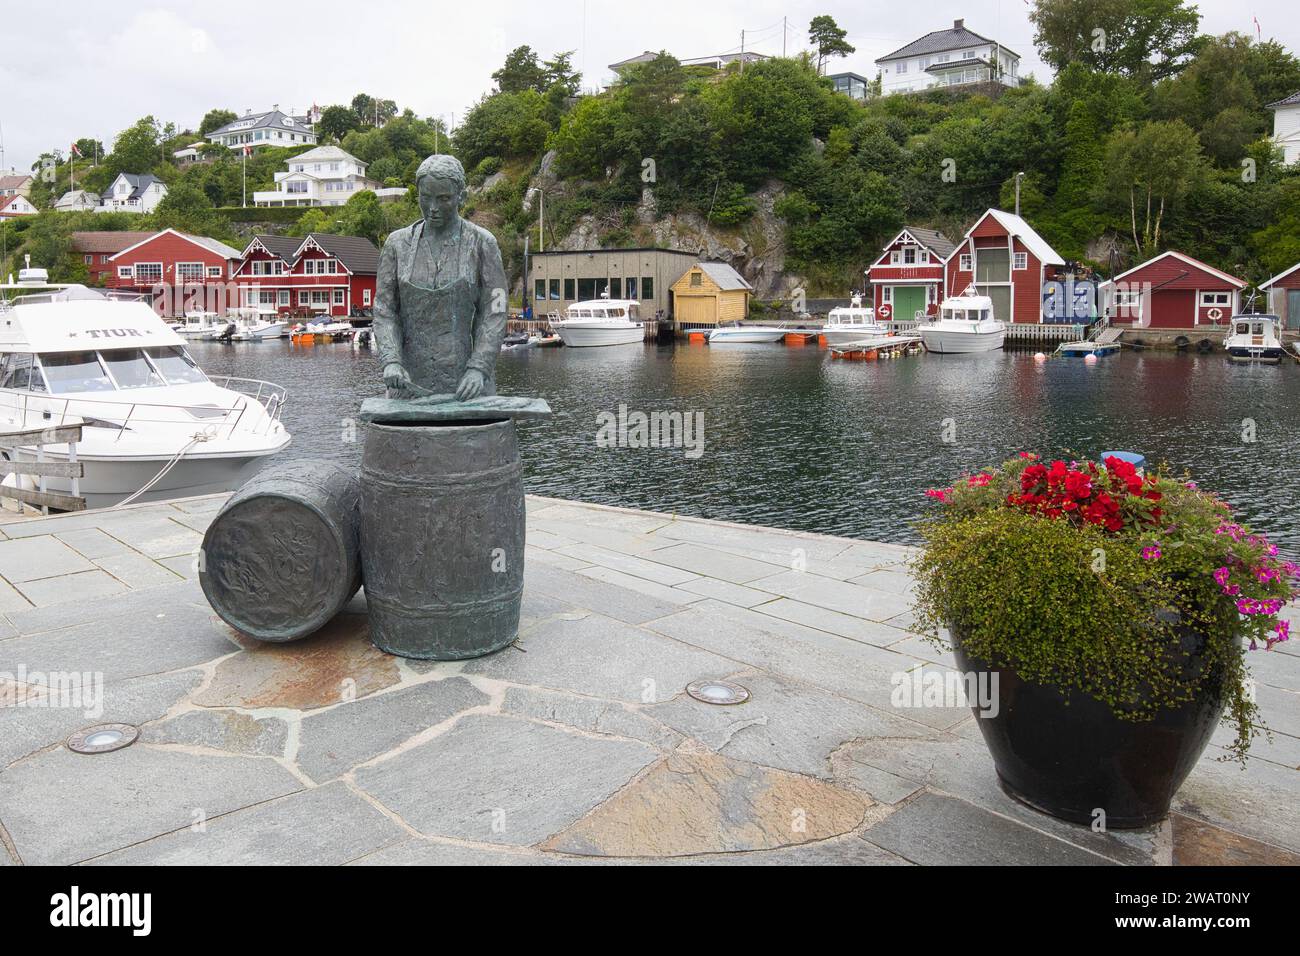 Norway, Vestland, Bekkjarvik - July 20, 2023: The statue Sildajenta commemorates the many women who worked in the herring factories until the end of t Stock Photo